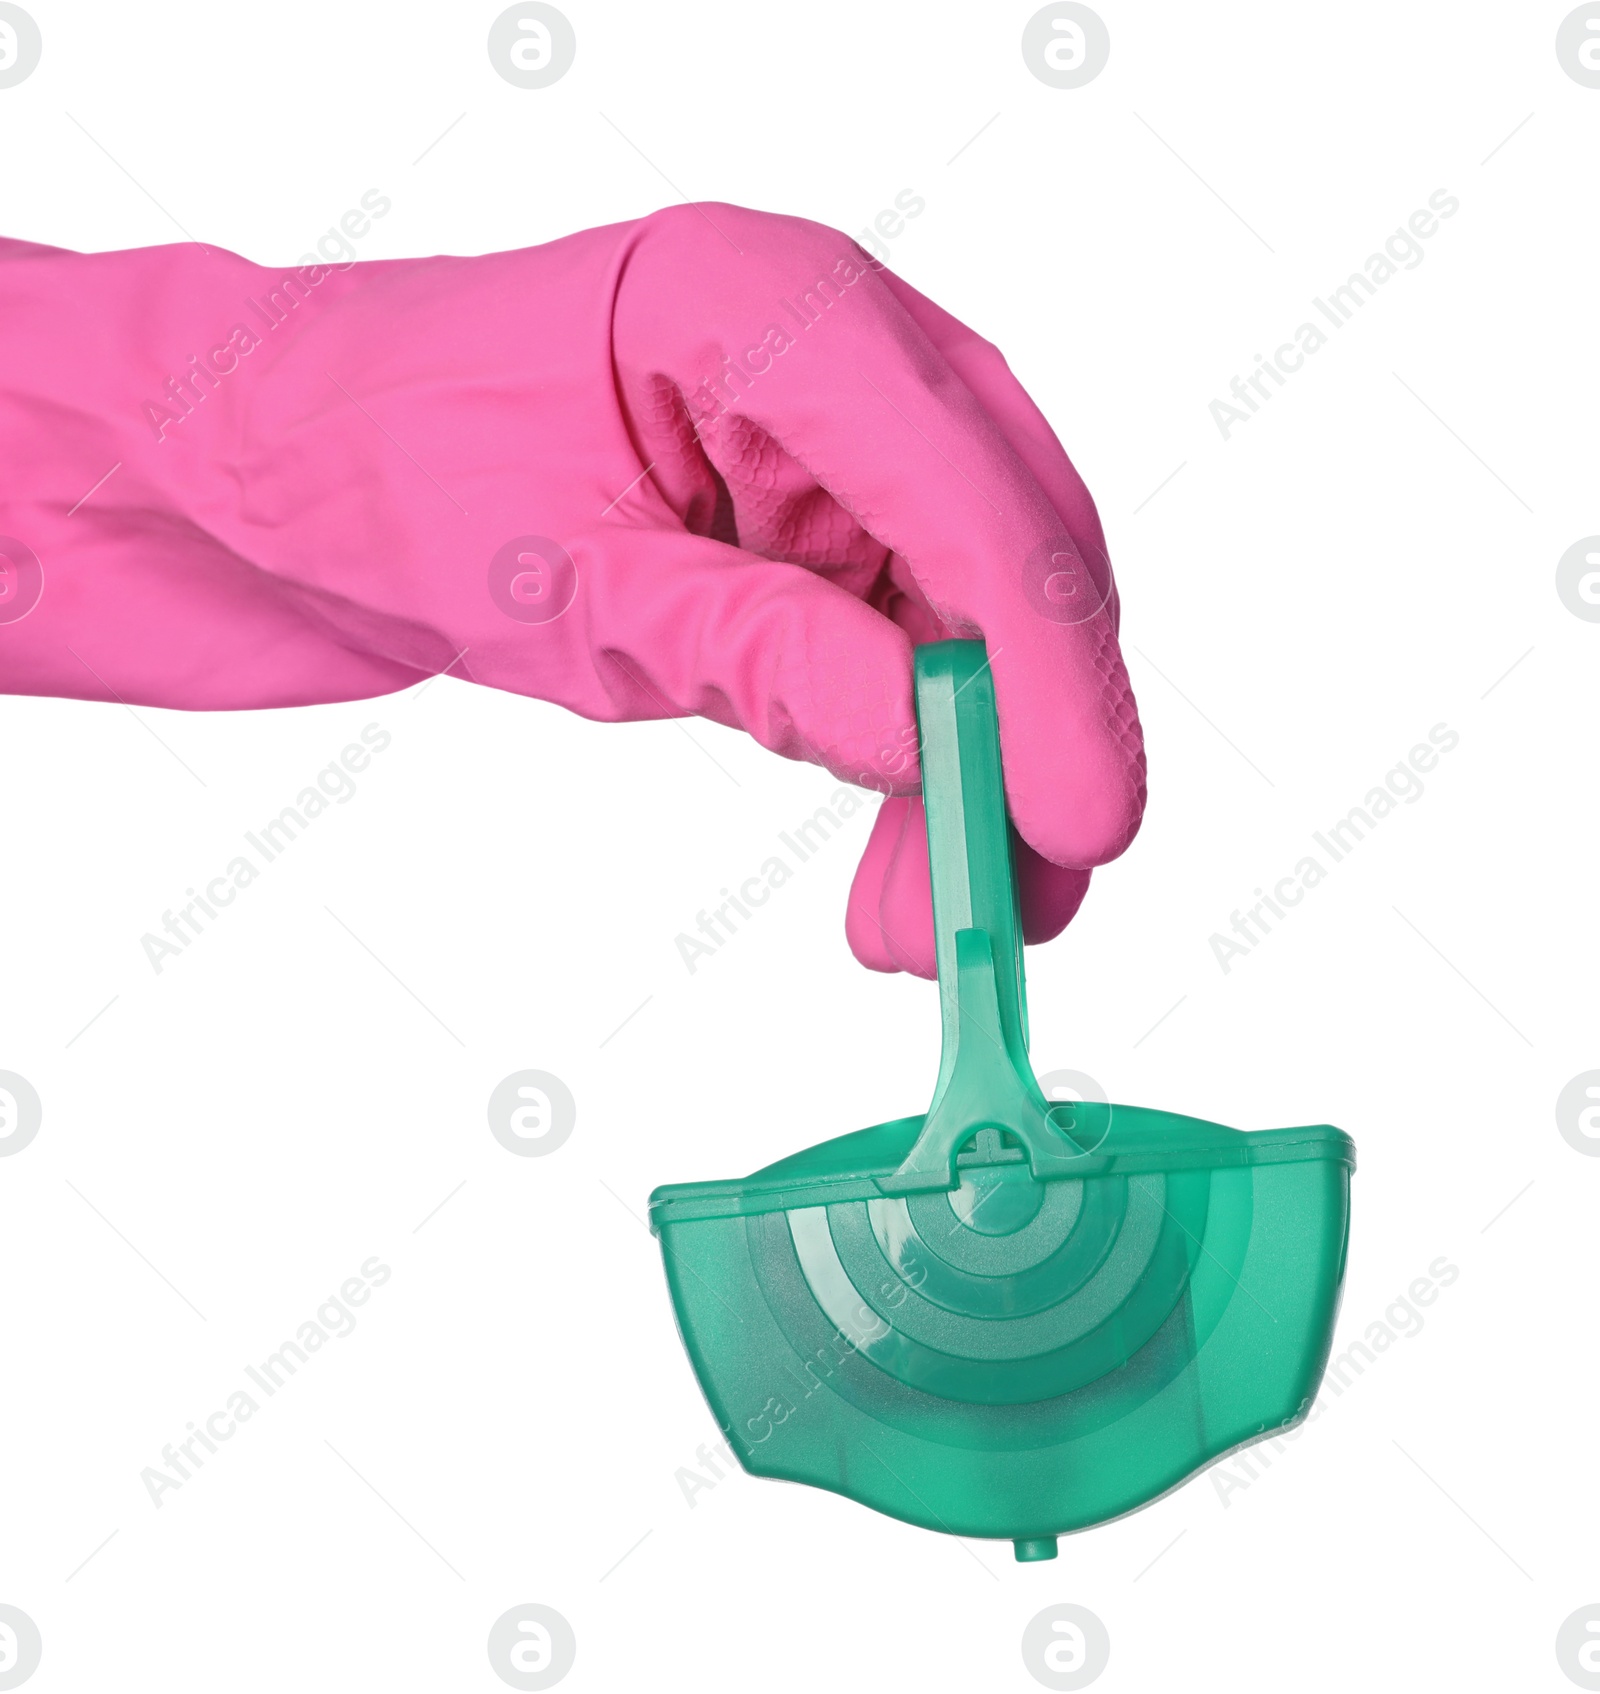 Photo of Woman holding toilet rim block cleaner on white background, closeup